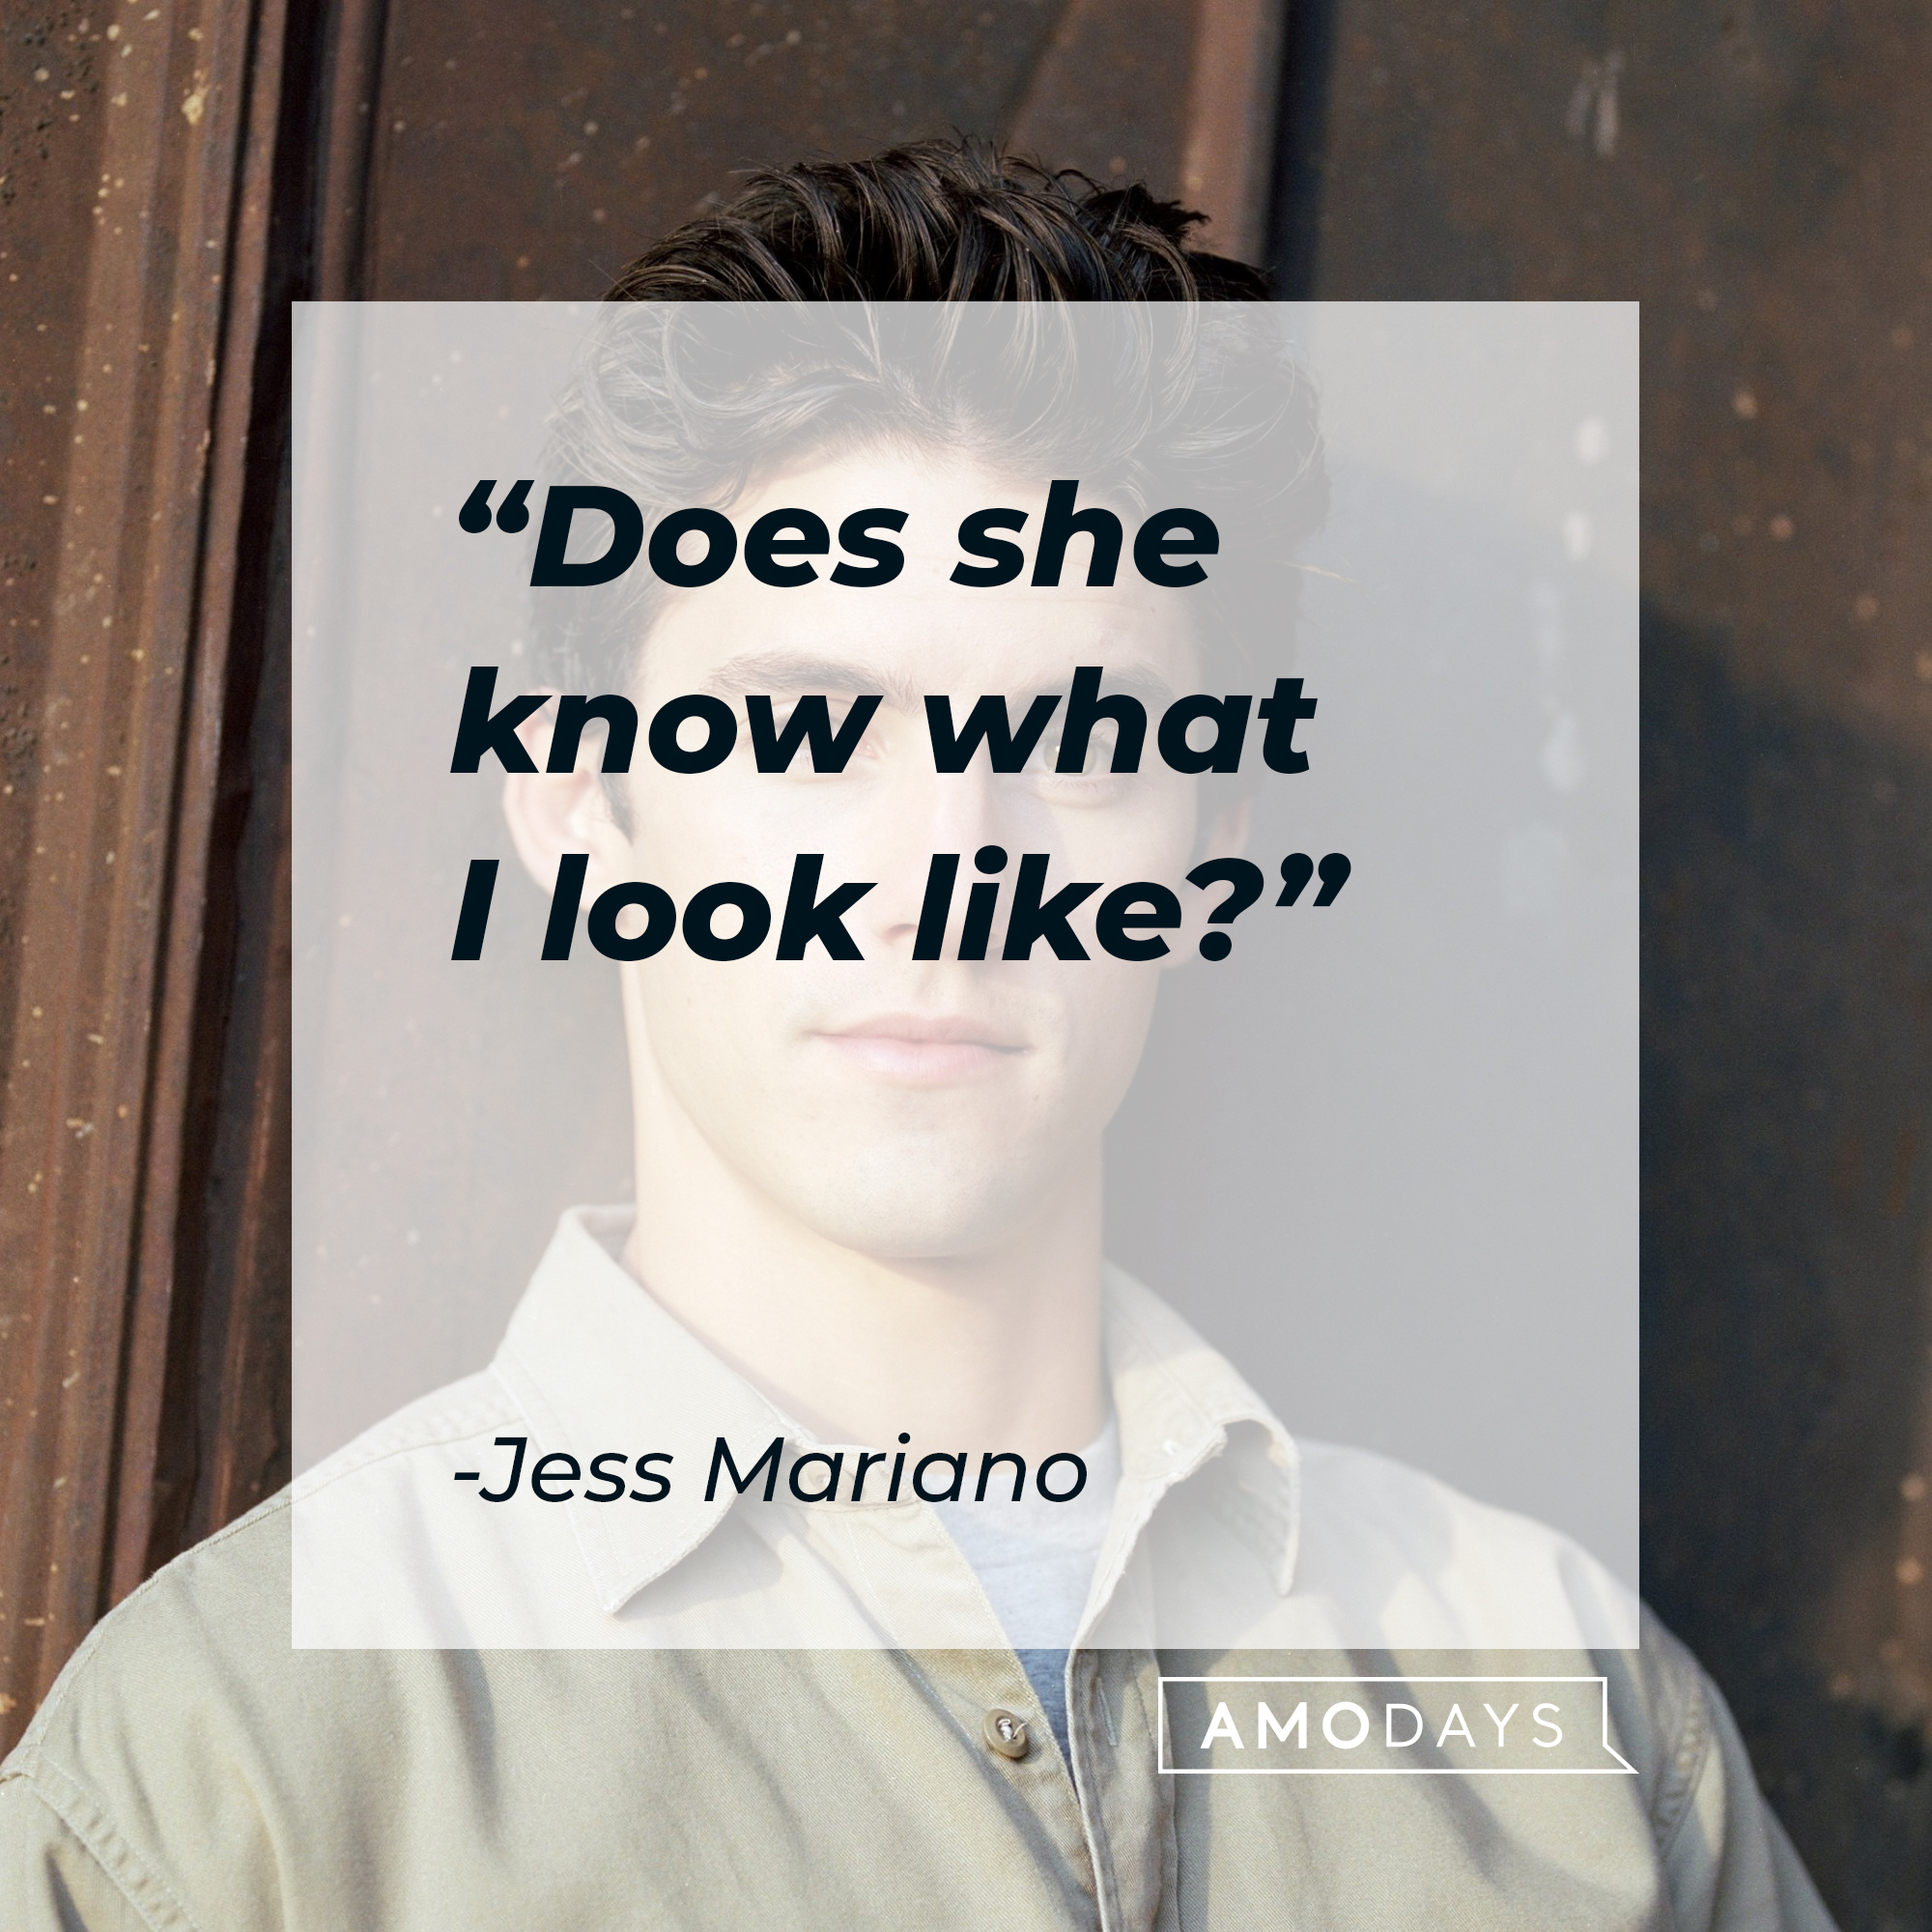 Jess Mariano, with his quote: “Does she know what I look like?” | Source: facebook.com/GilmoreGirls